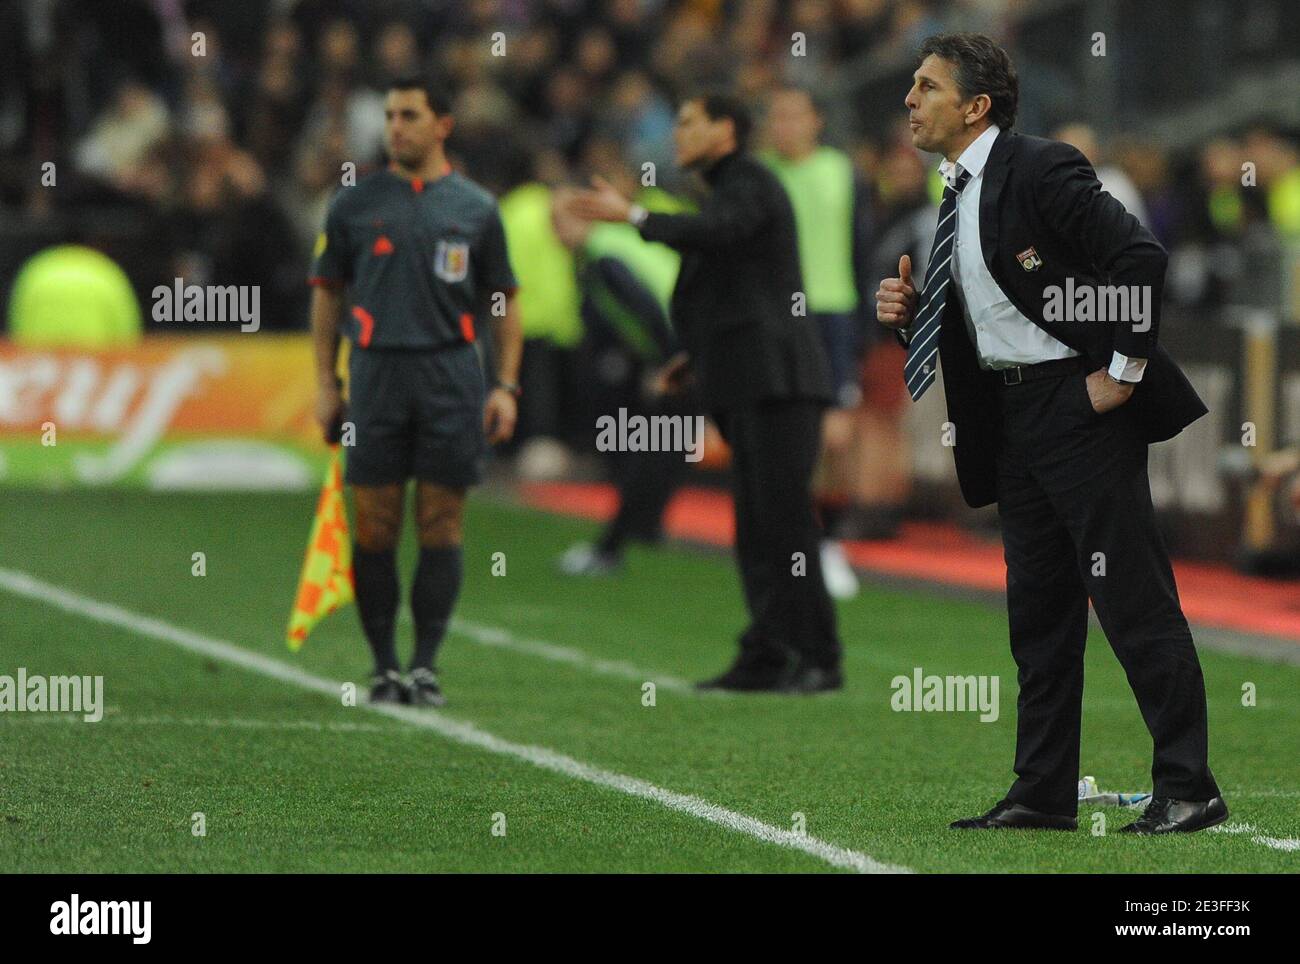 Lyon coach Claude Puel during the French First League Soccer match, Lille  OSC vs Olympique Lyonnais at the Stade de France in Saint-Denis near Paris,  France on March 7, 2009. Photo by